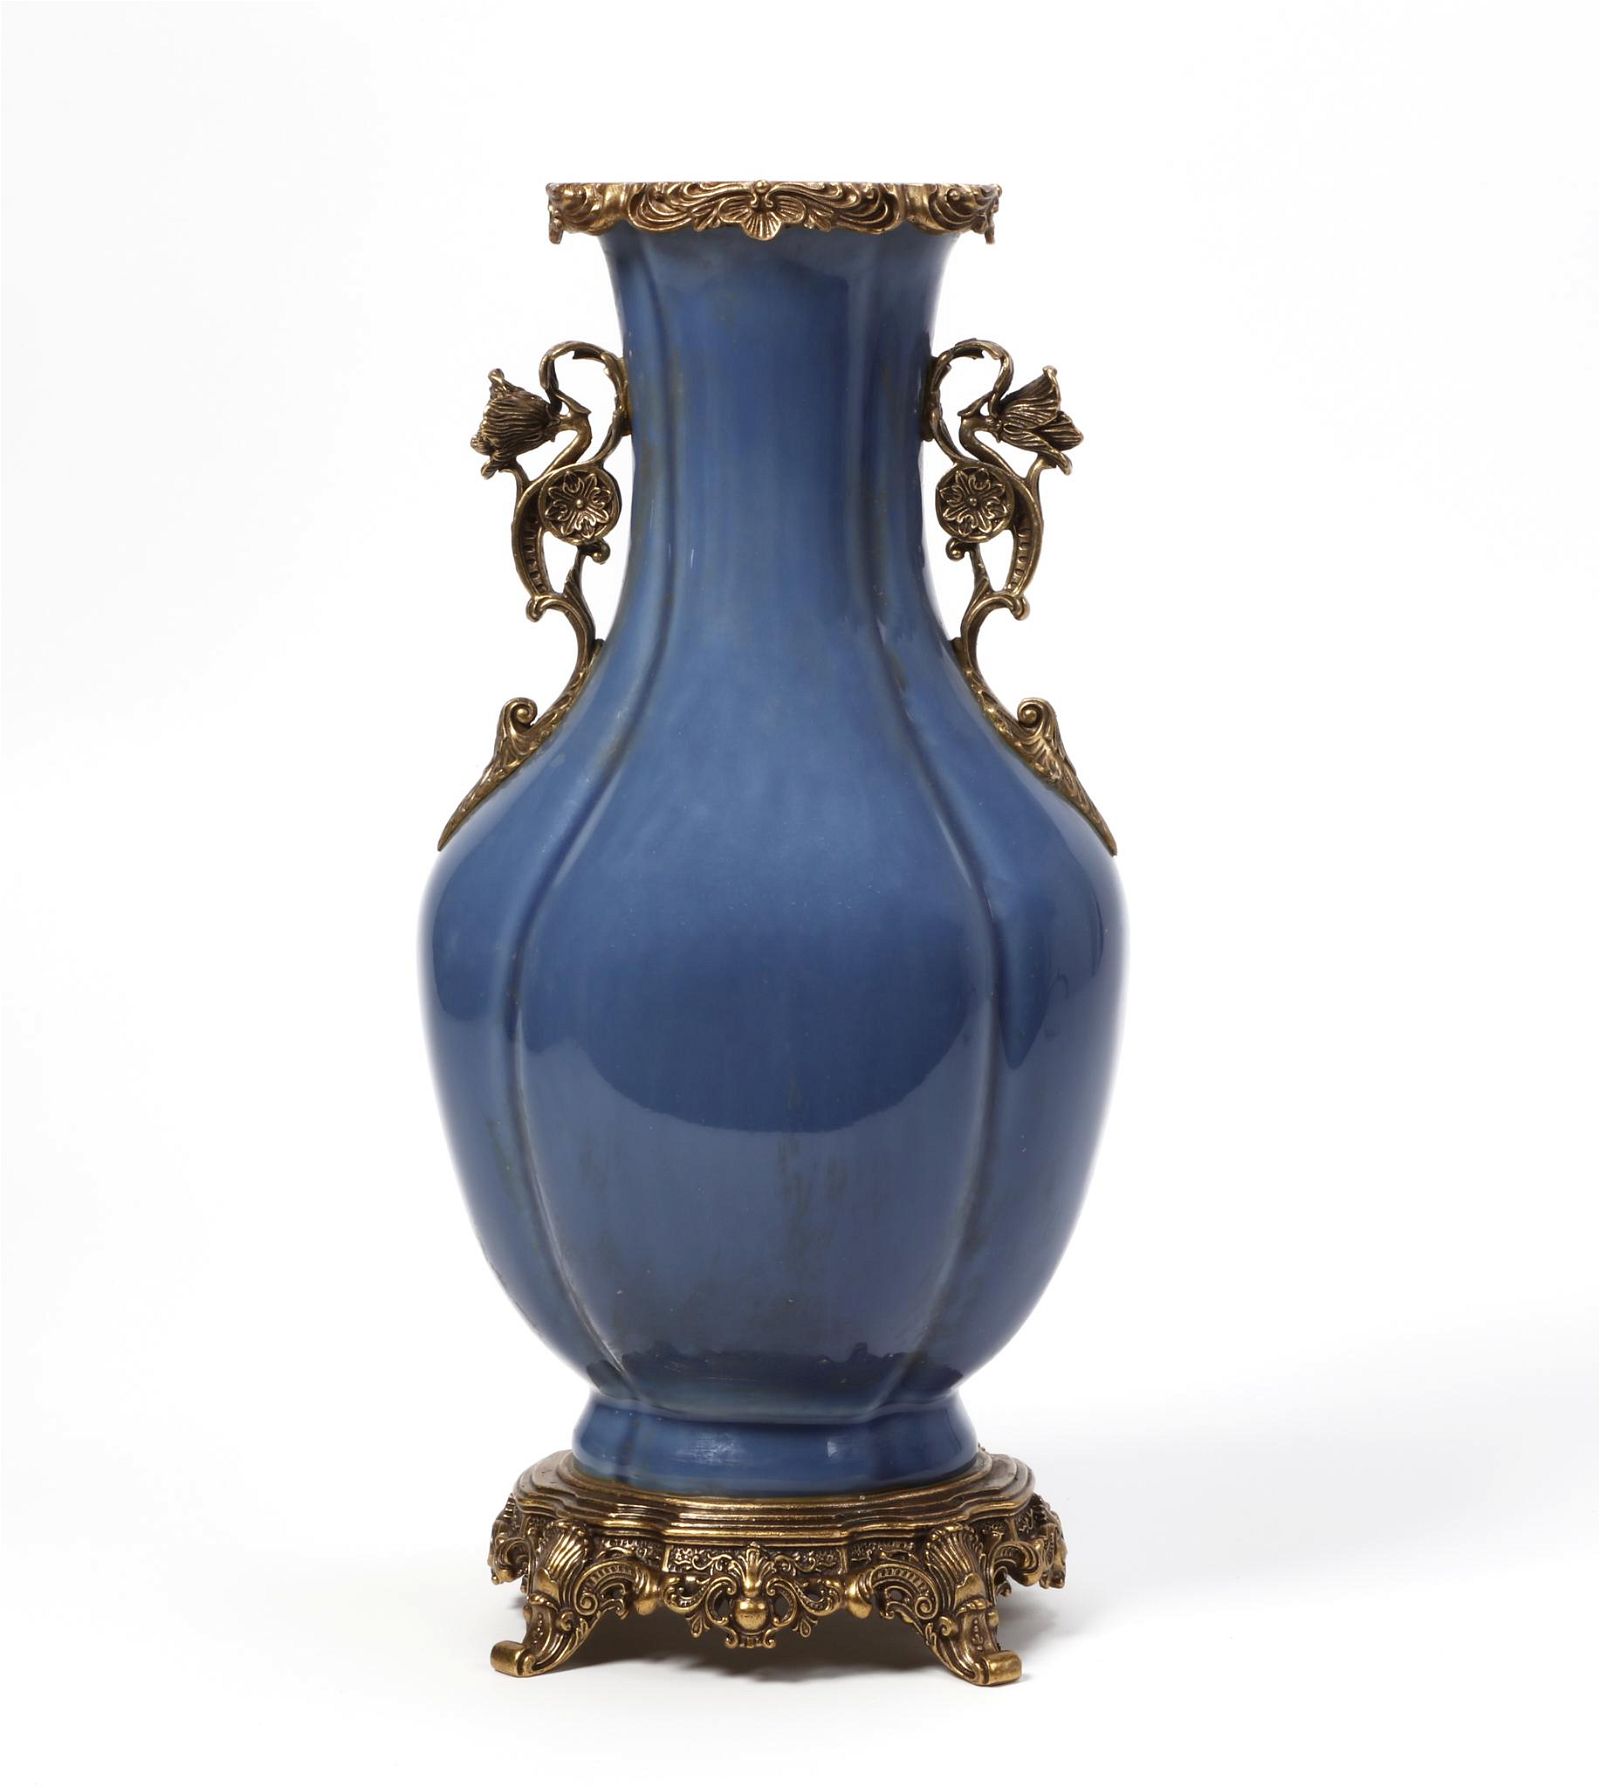 A CHINESE PORCELAIN VASE WITH GILT